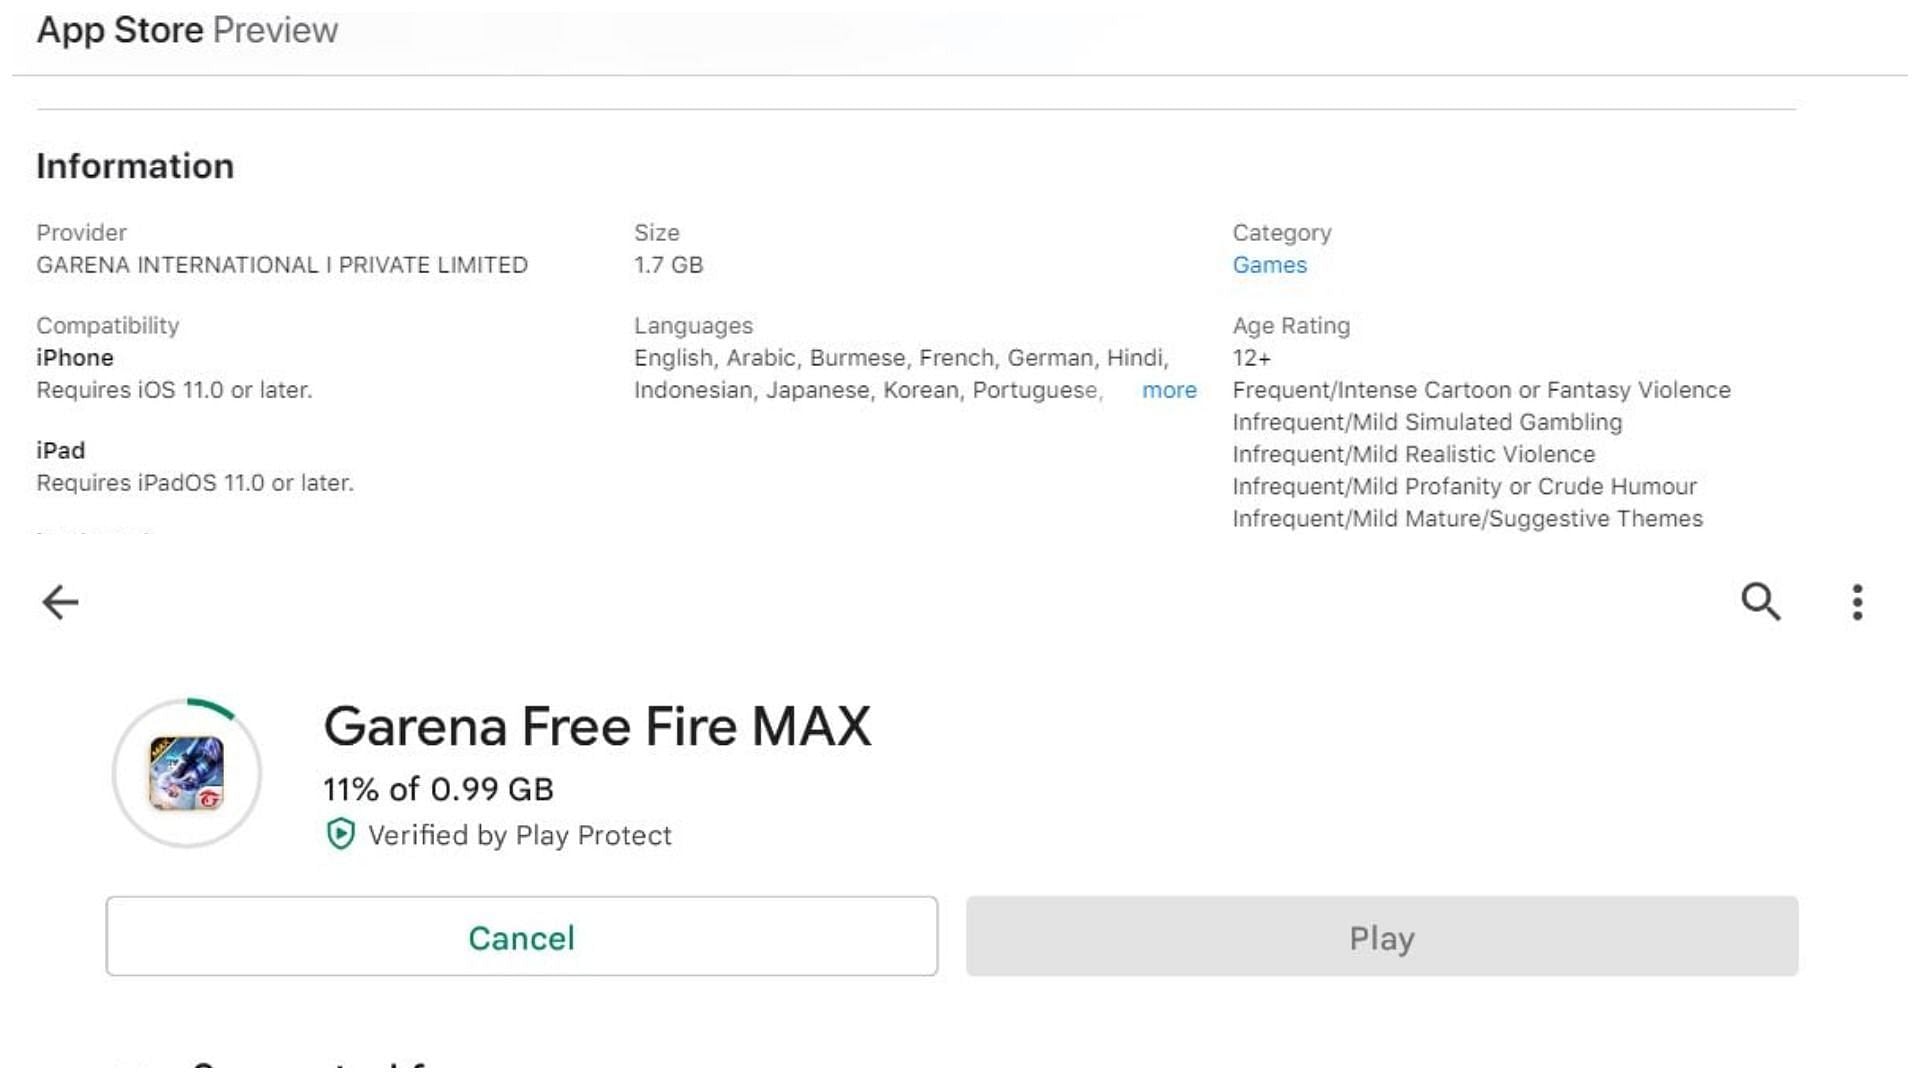 Download size - Free Fire MAX (Image via App Store/Google Play)